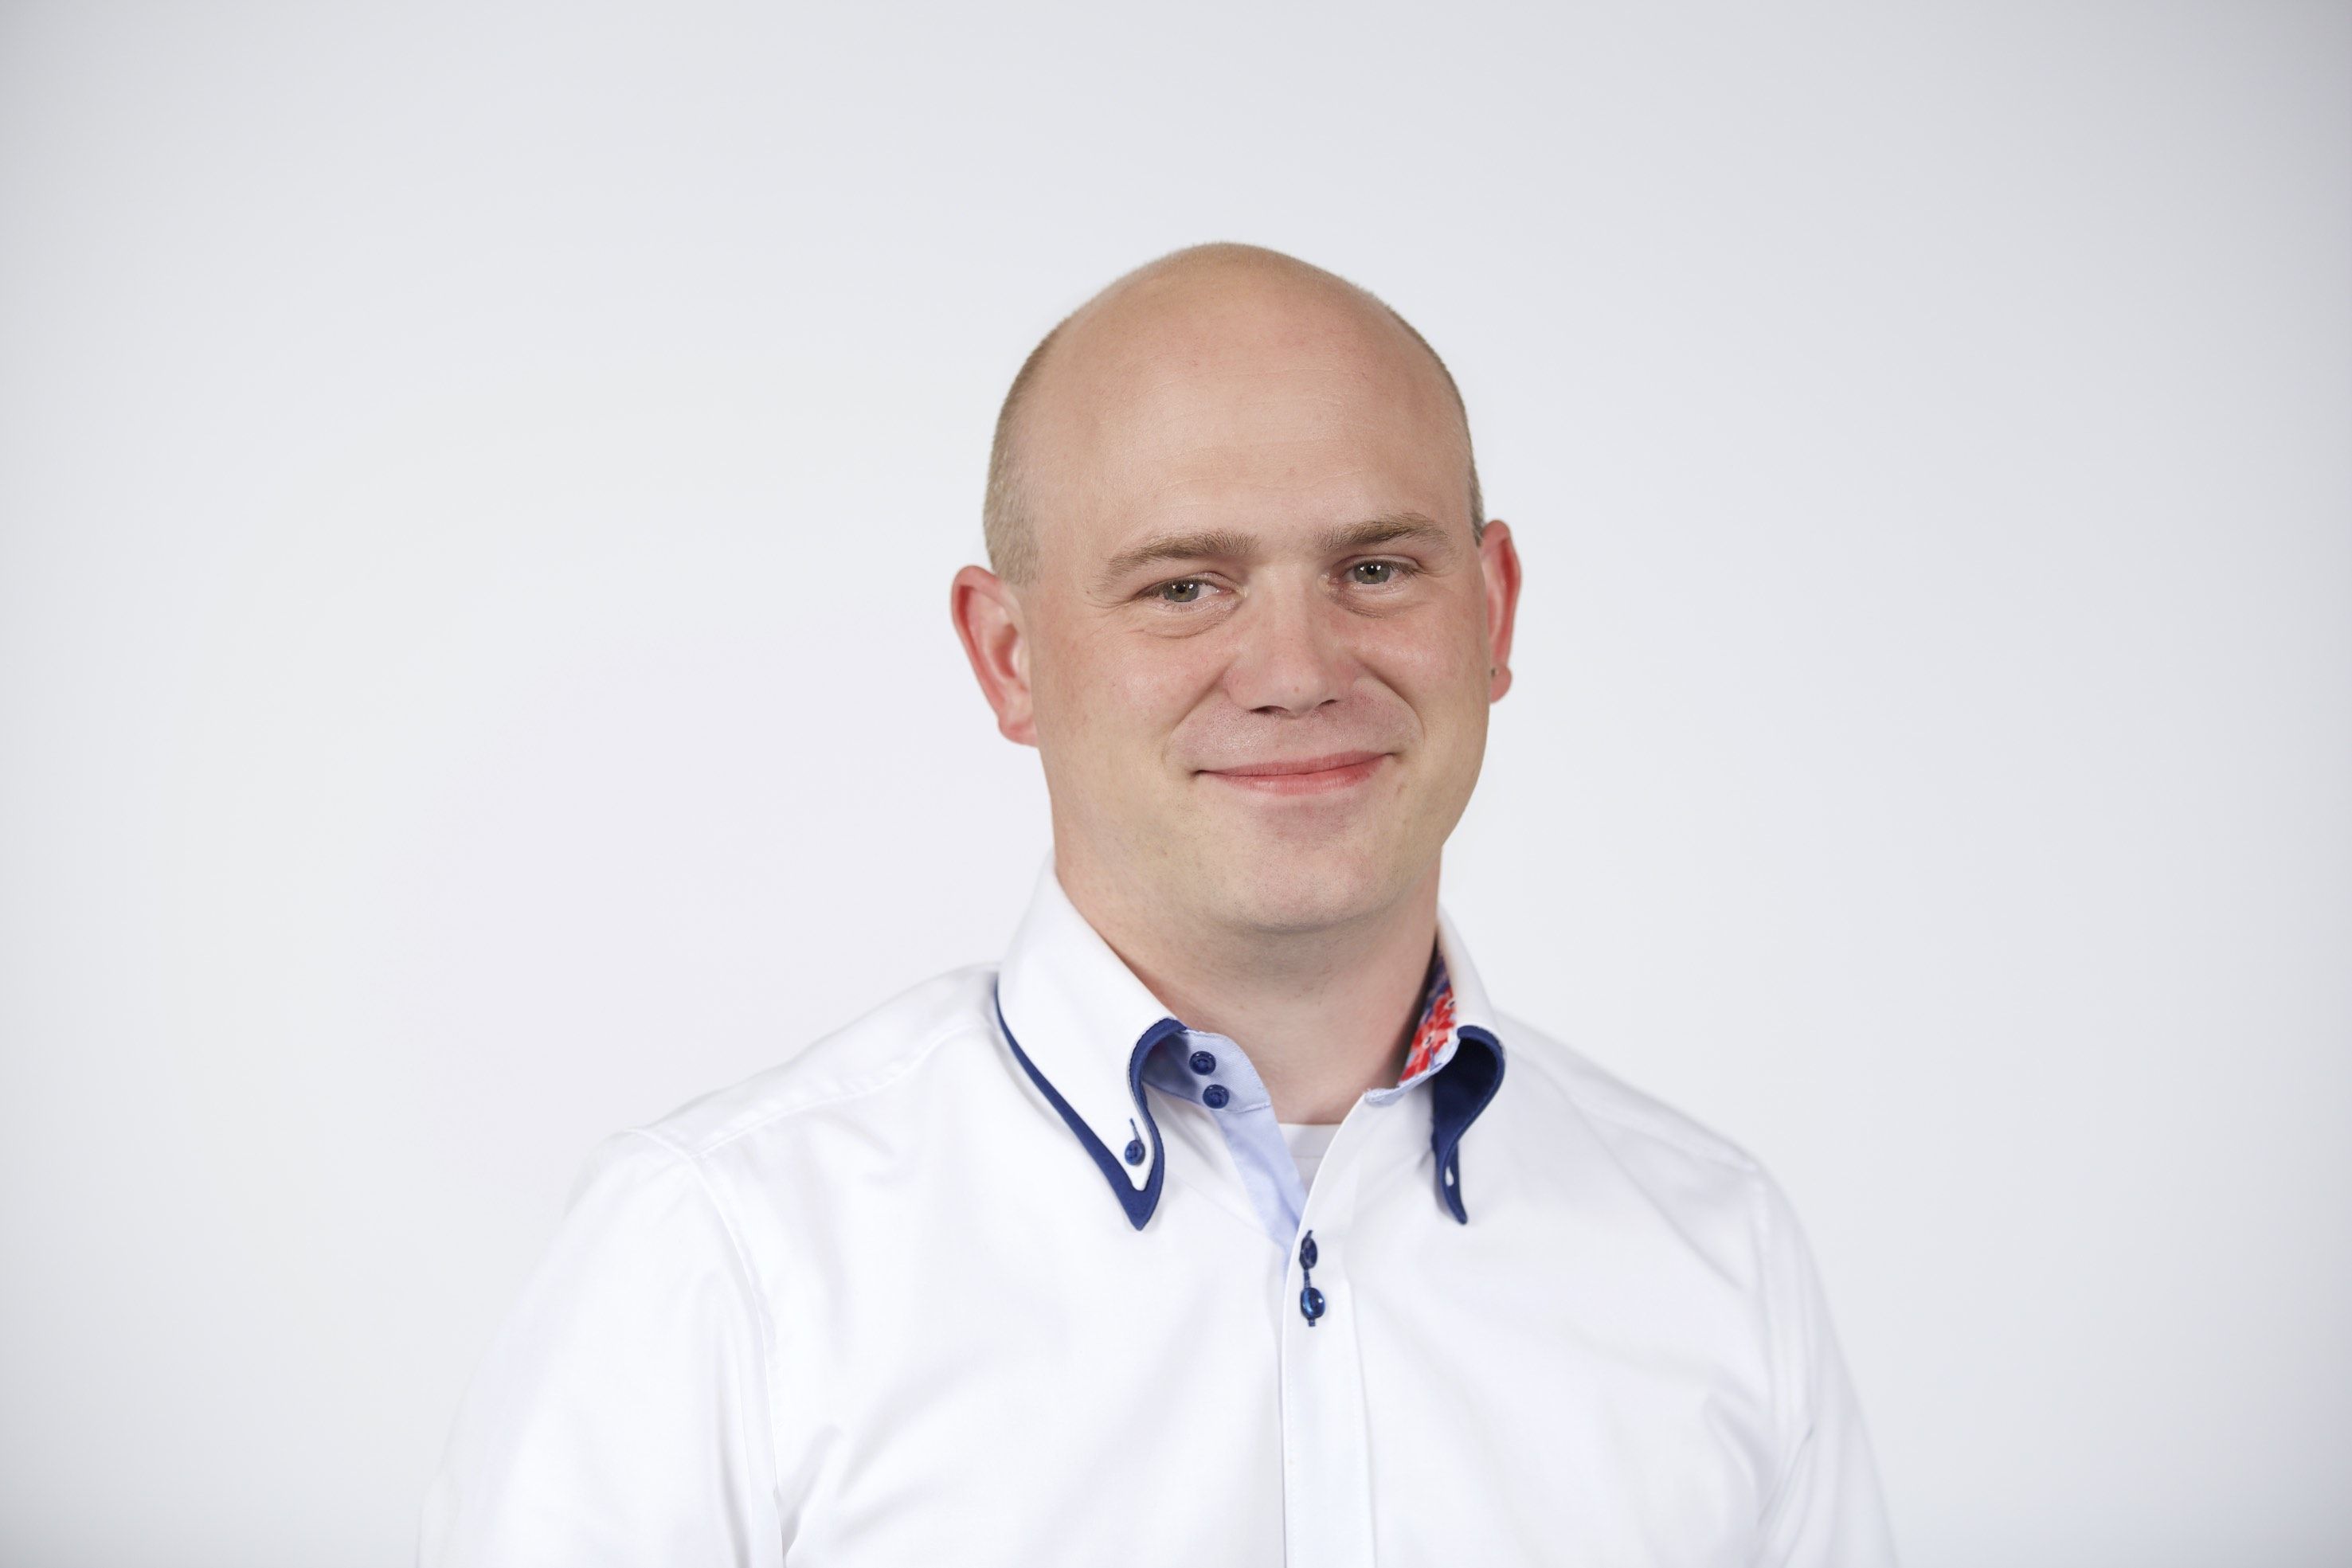 Christoph Eppert, ISE project manager for Sennheiser from 2012 to 2015. At ISE 2020, Christoph is responsible for the technical set-up. He will not miss the wet and cold February weather in Amsterdam. From 2021 on, the ISE will take place in Barcelona.